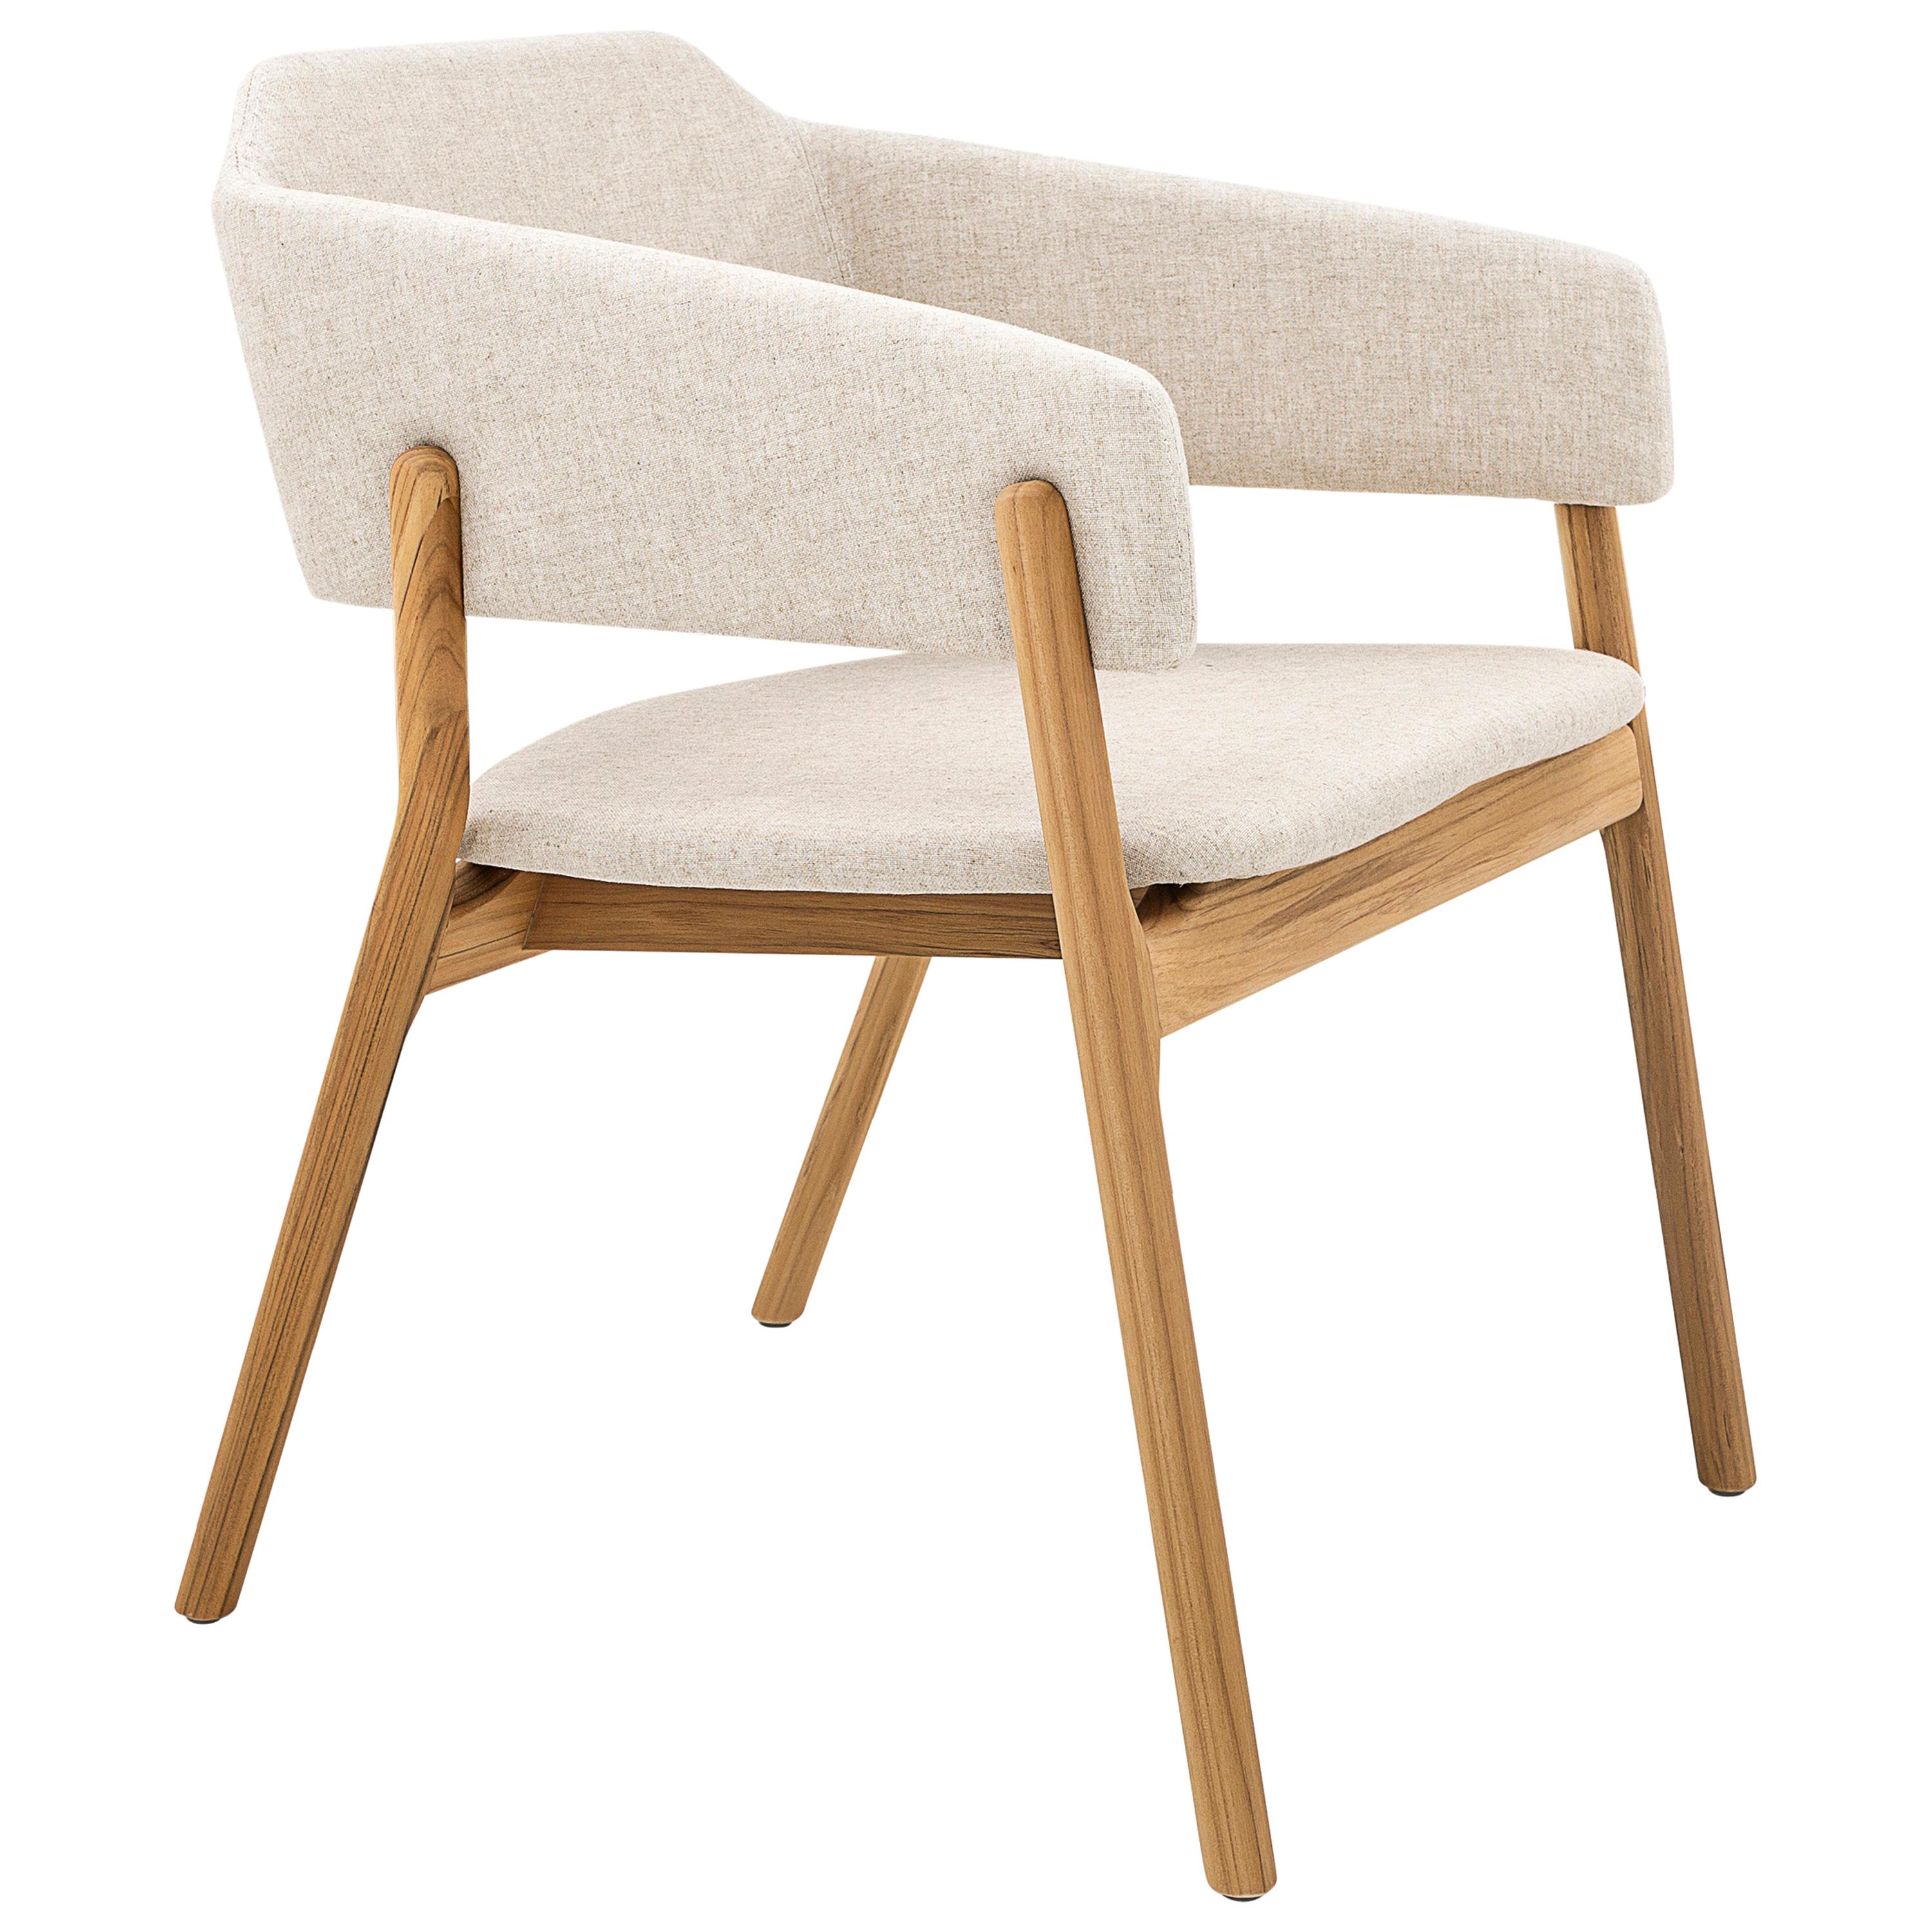 Stuzi Chair in Teak Wood Finish with Oatmeal Fabric For Sale